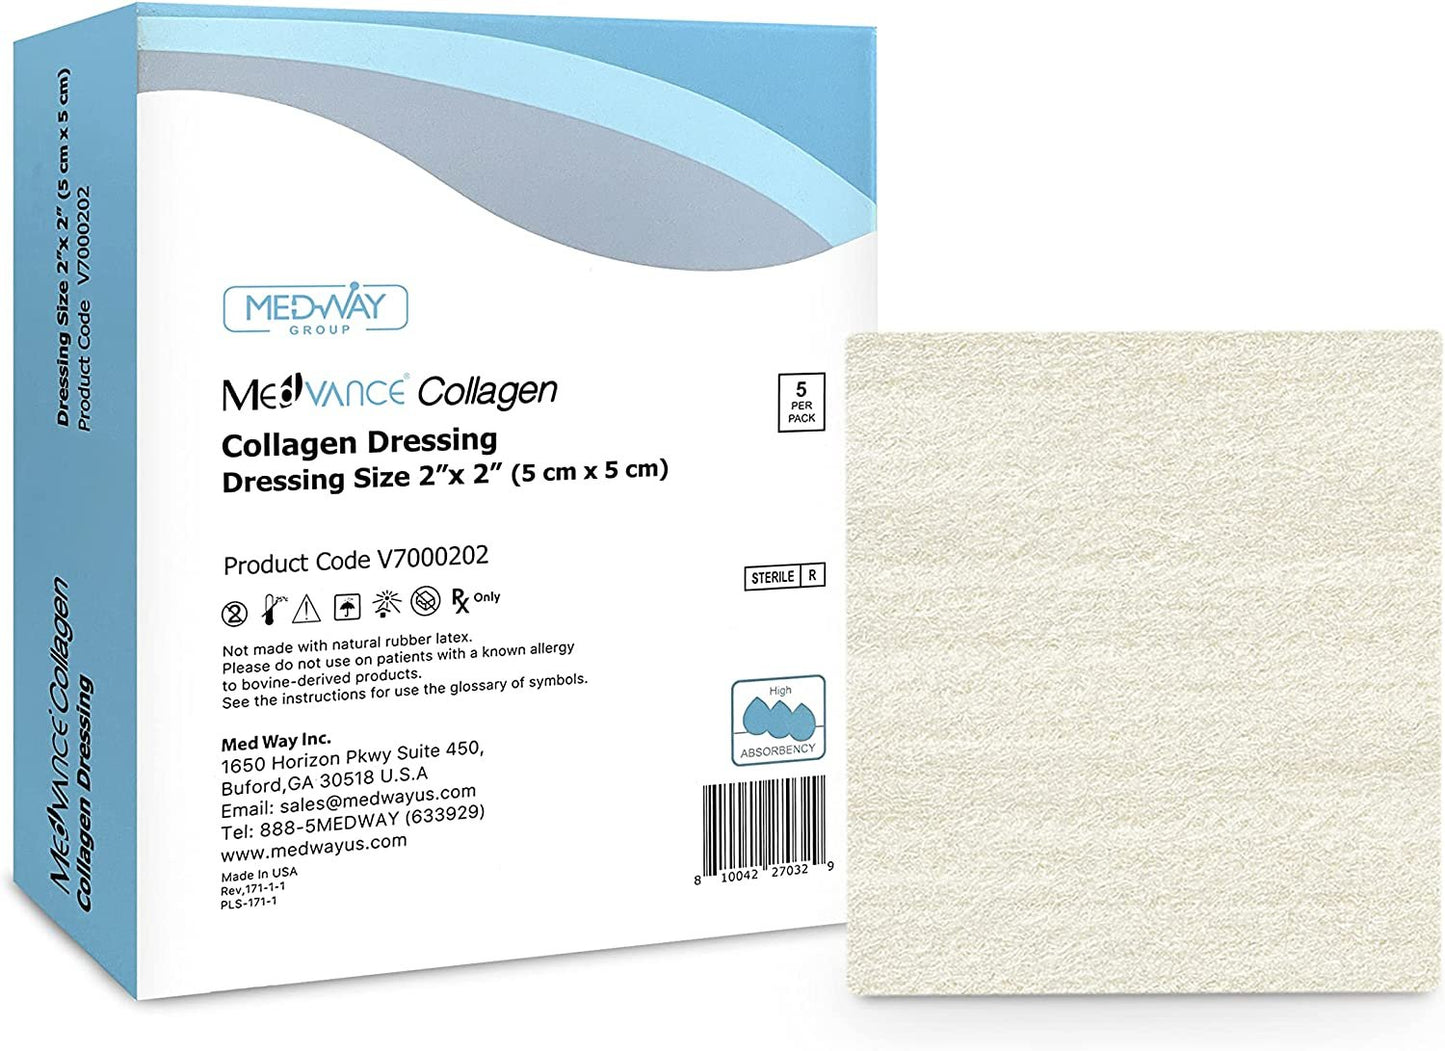 MedVance Collagen Non-Adhesive Wound Dressing, 2"x2", Single Piece